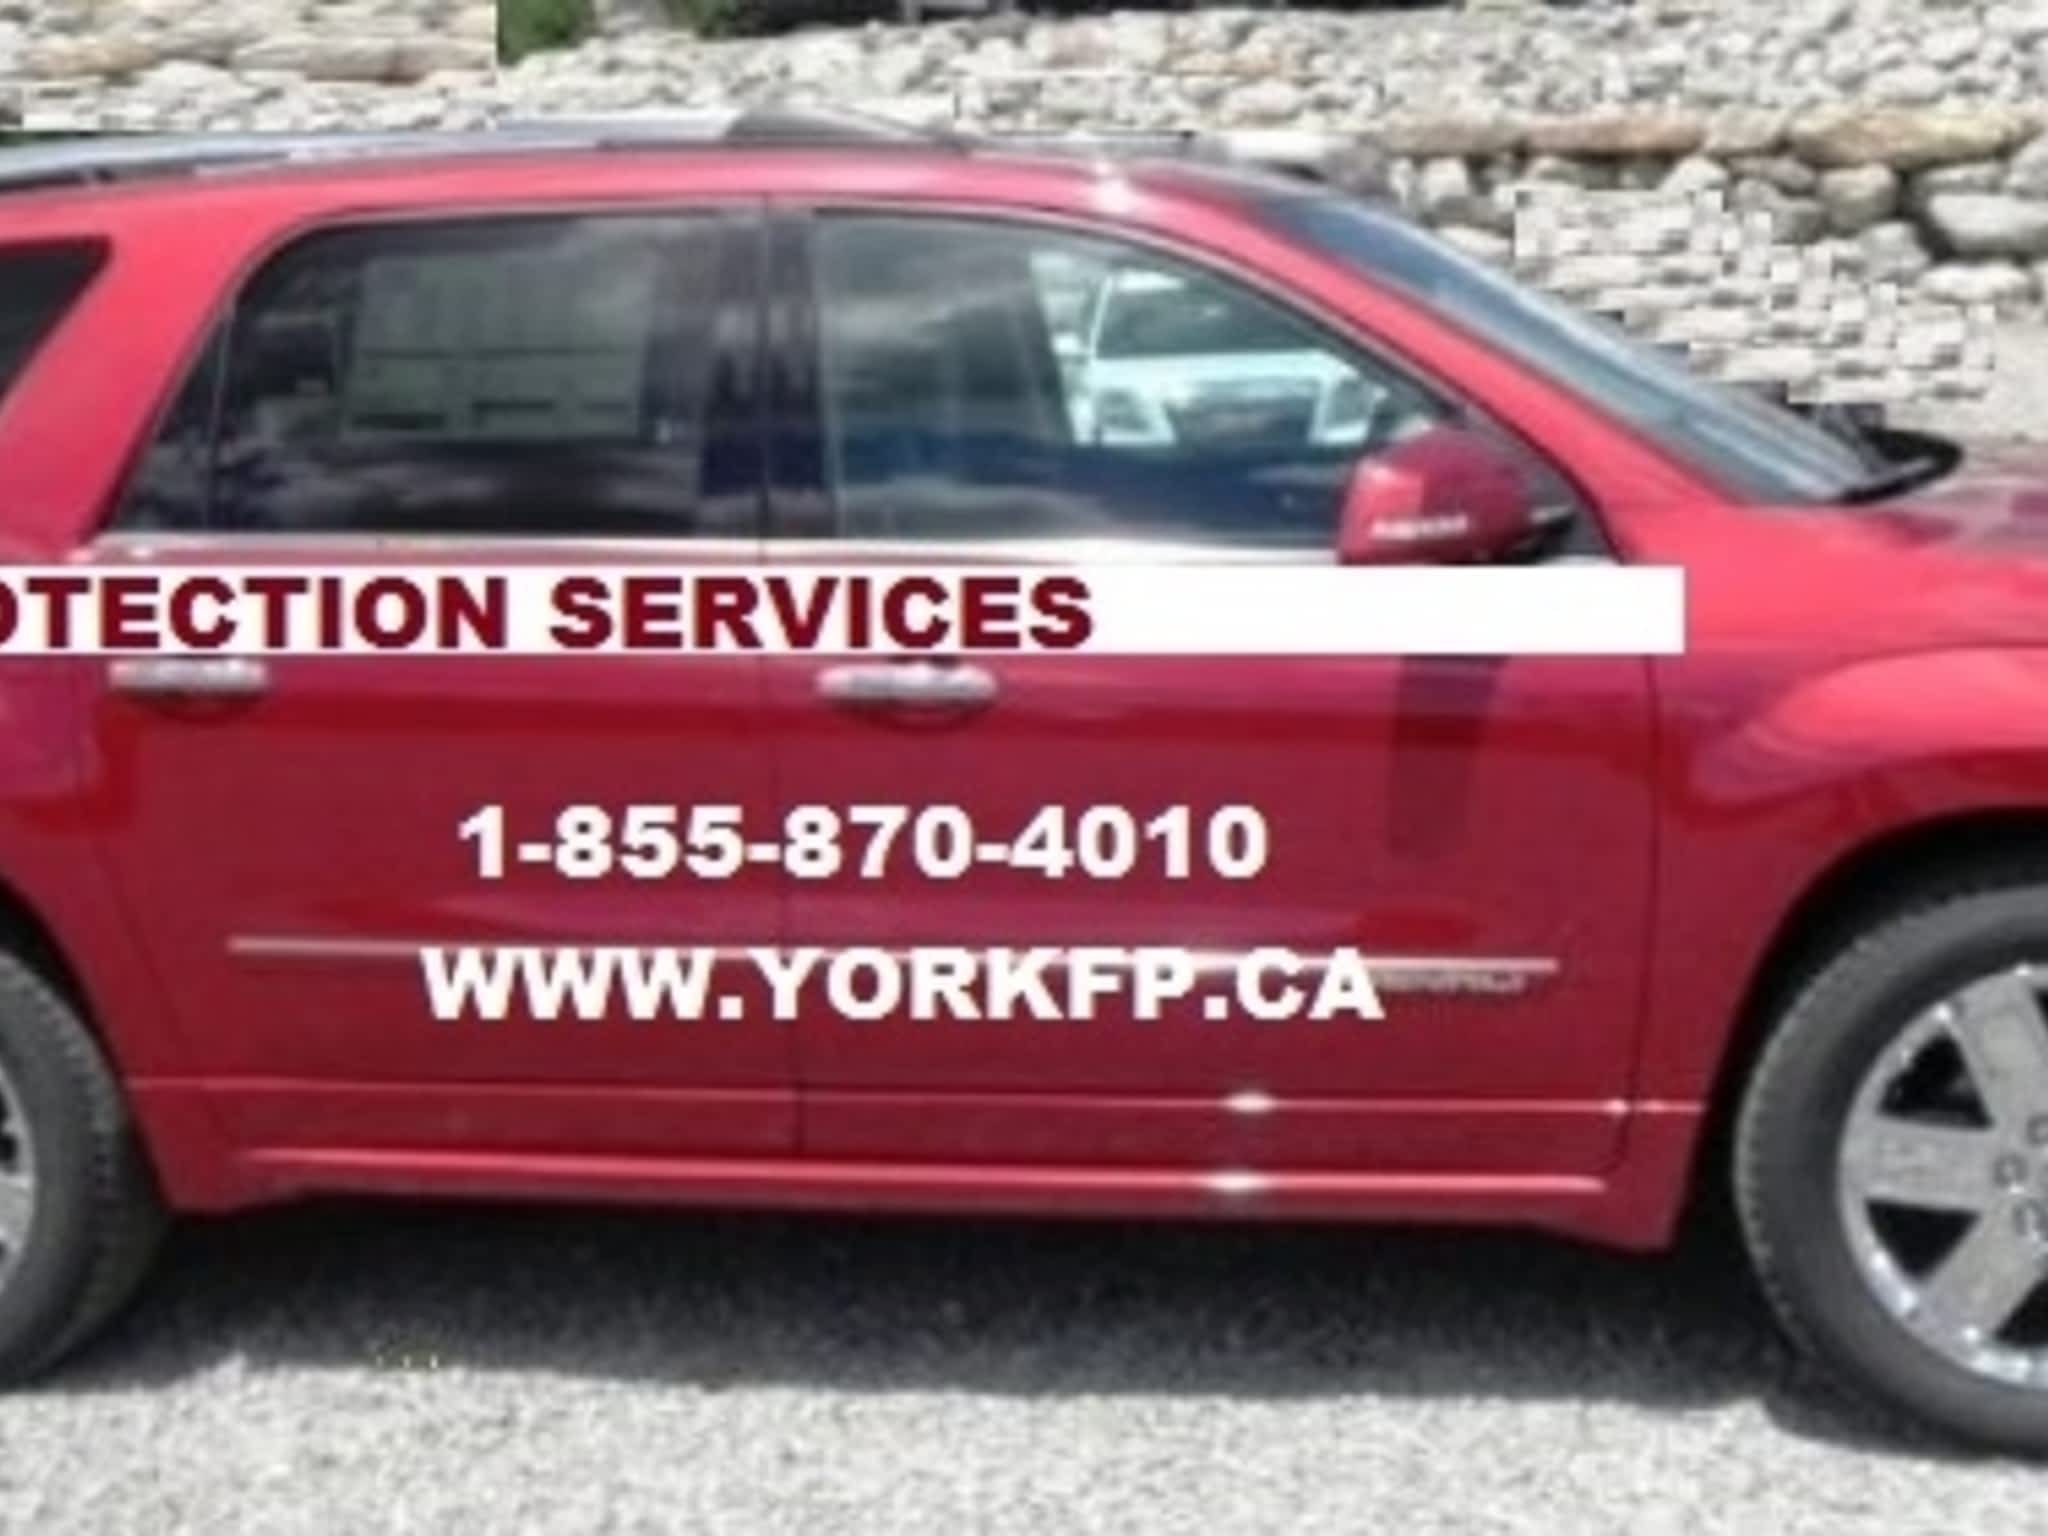 photo York Fire Protection